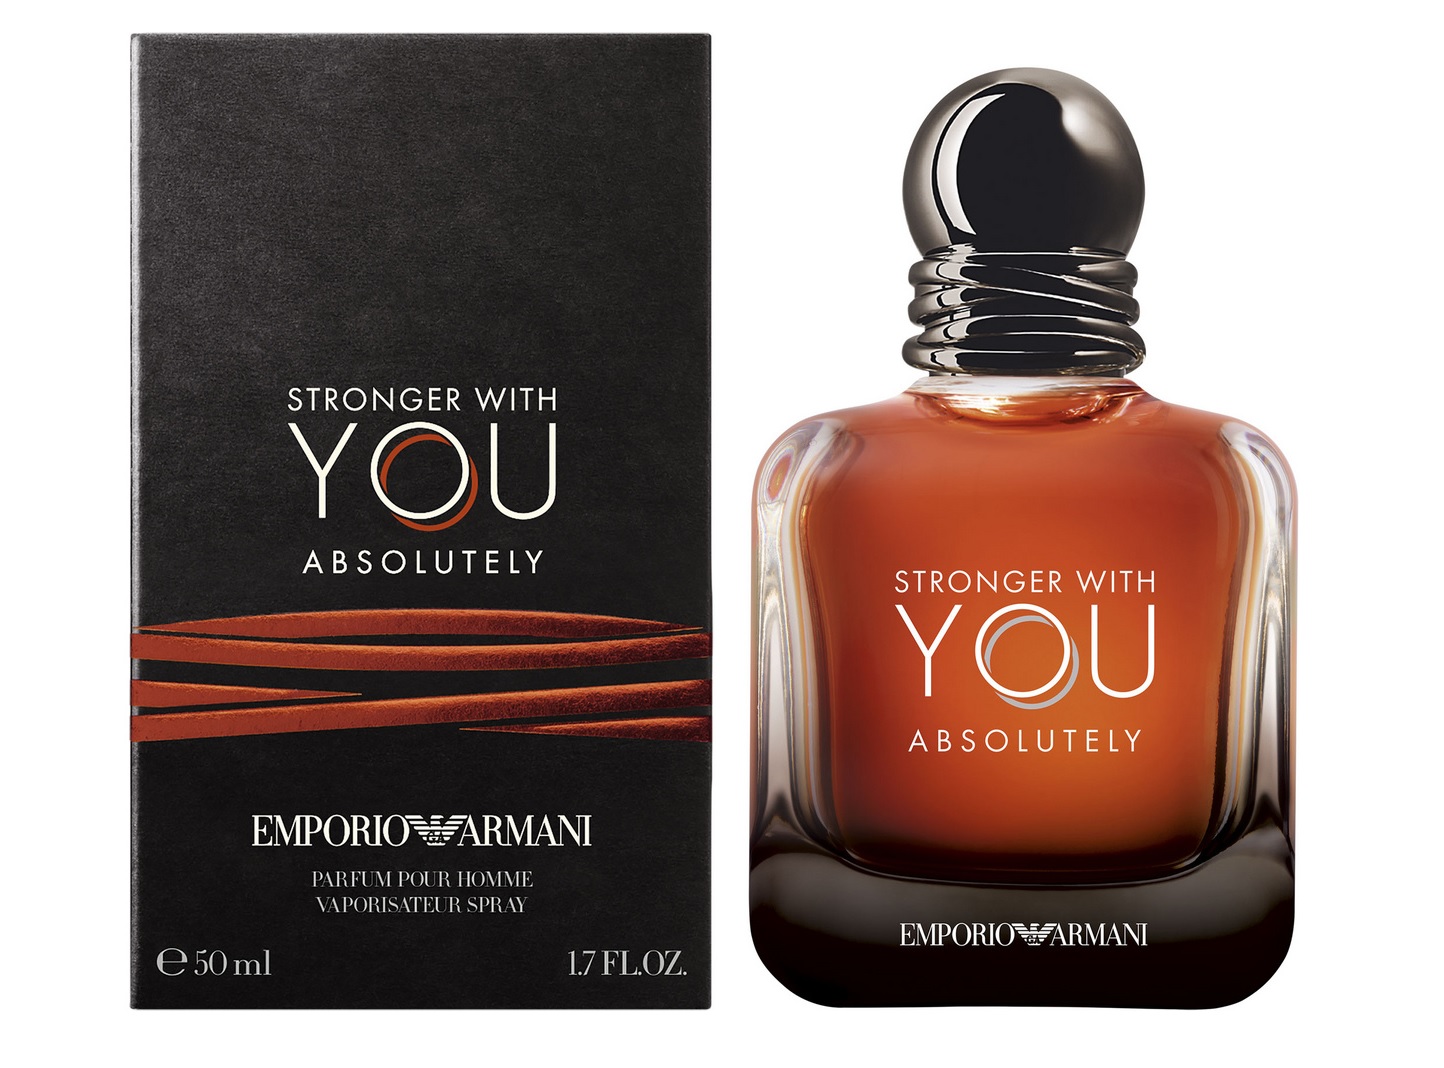 Armani - Emporio Armani Stronger With You Absolutely ~ New Fragrances